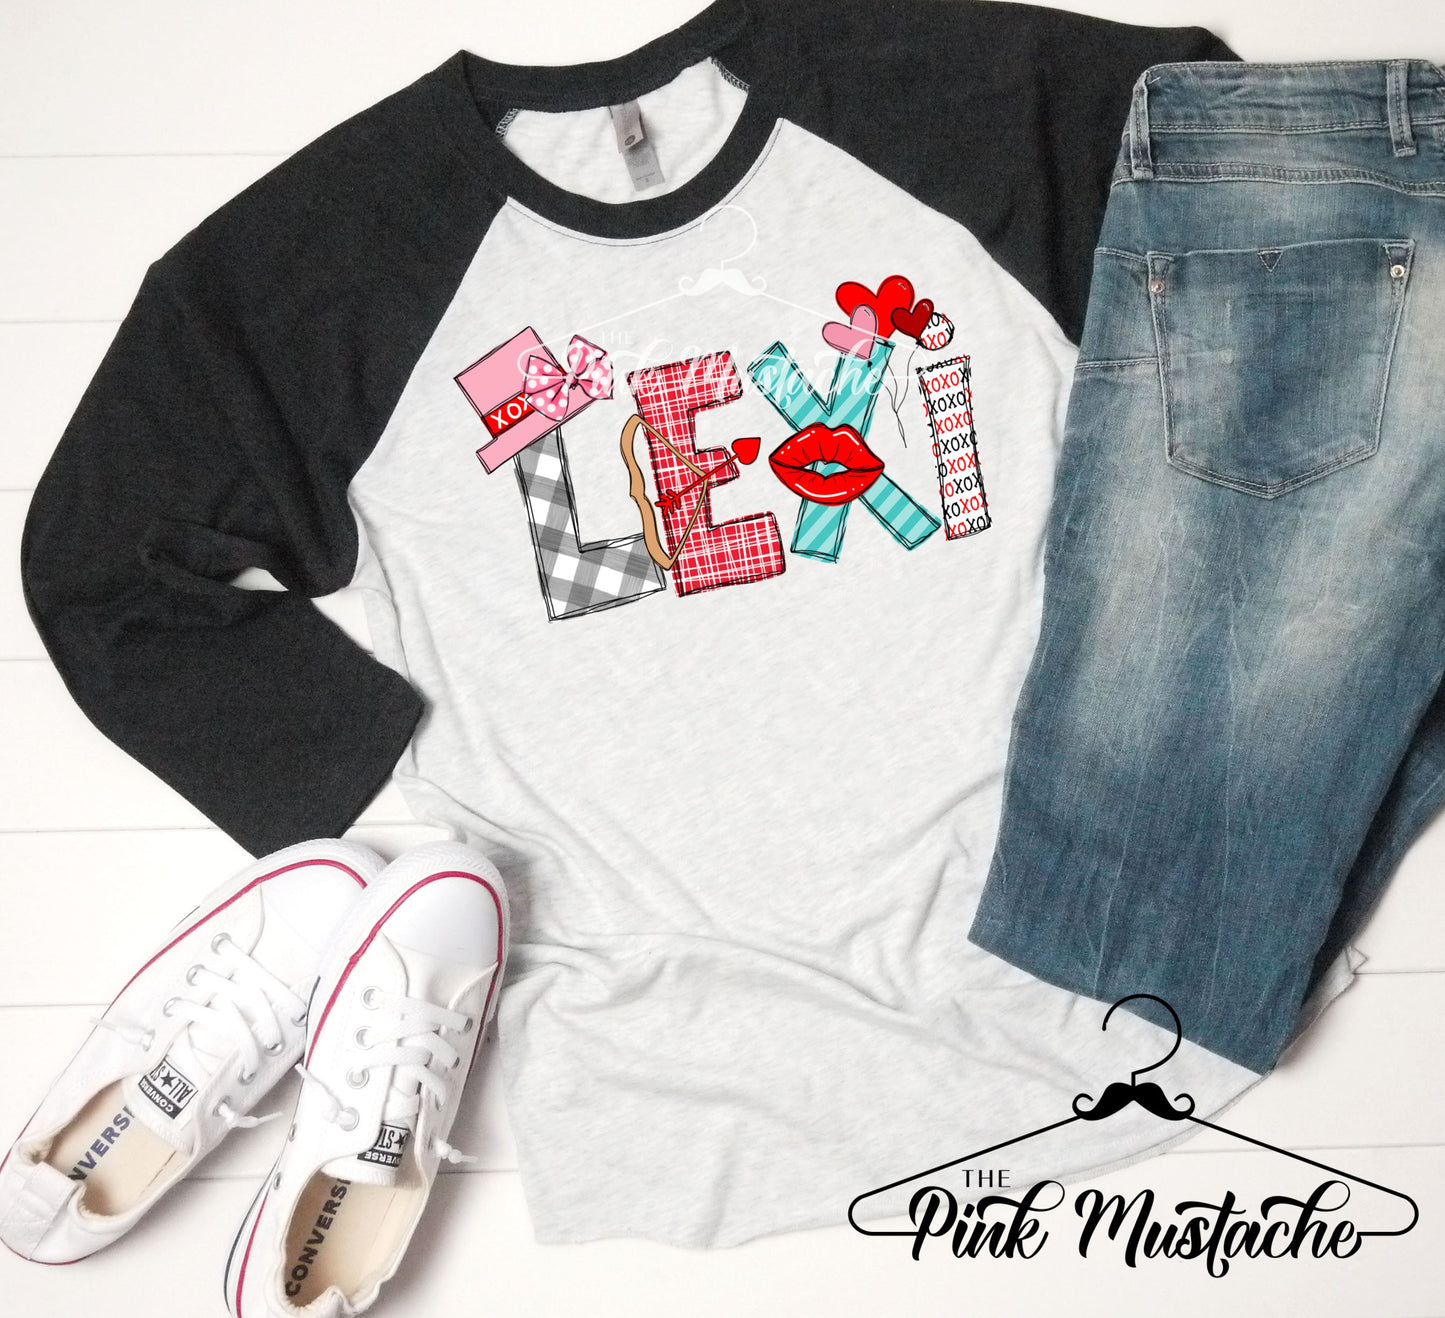 Girly Valentines Custom Monogram Raglan - Any Name - Toddler (2T - 5T) - Youth (S-L) - And Adult (S - 3XL)